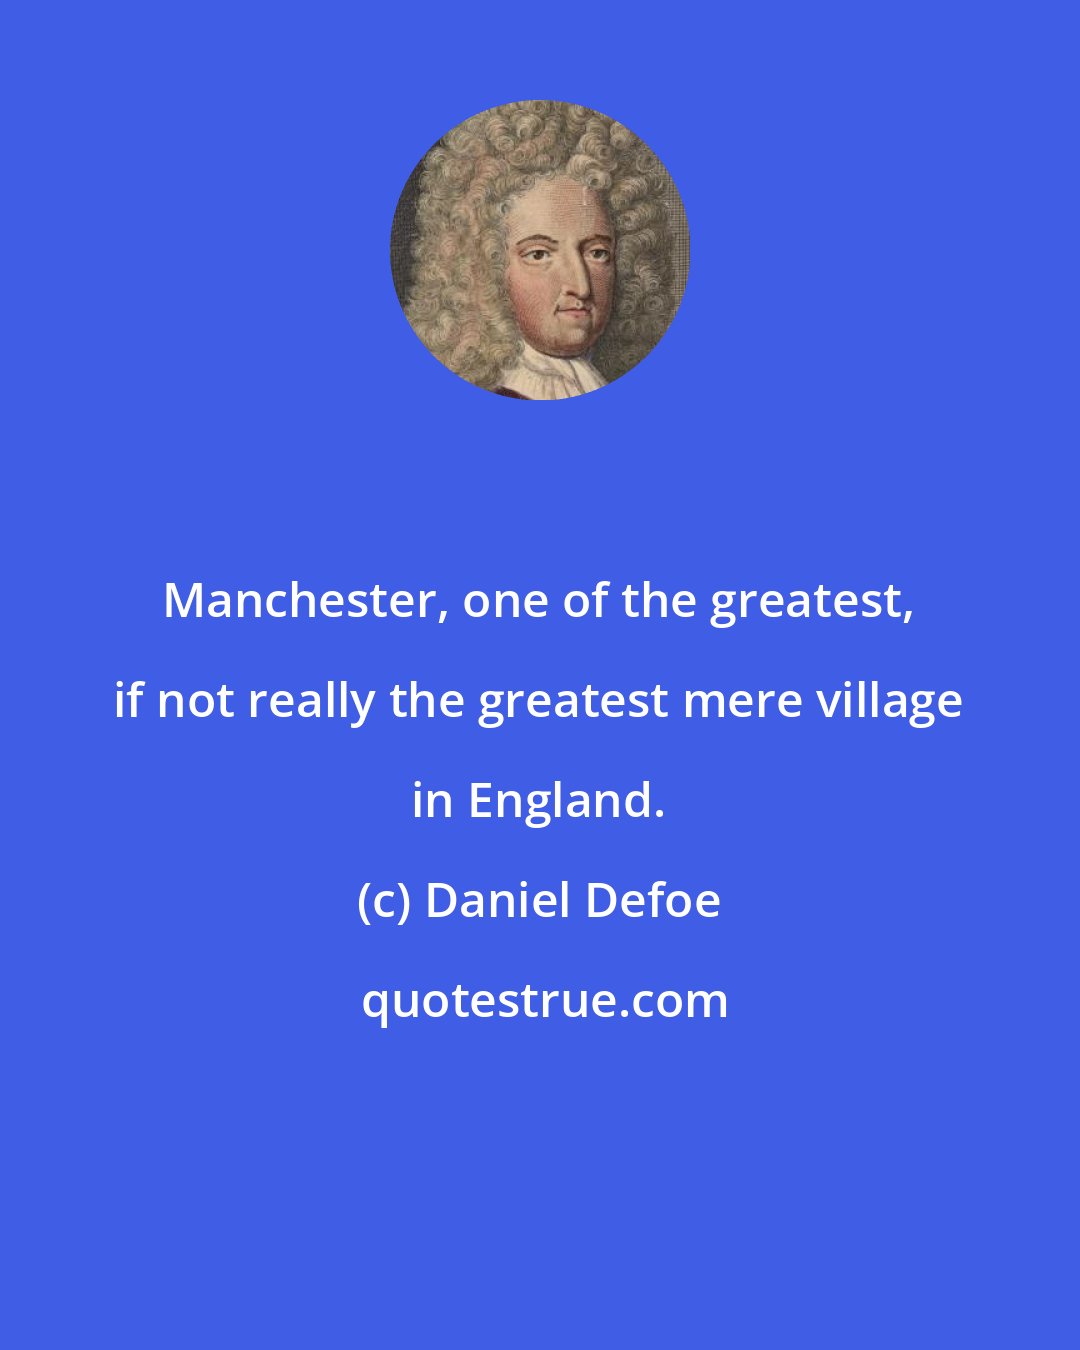 Daniel Defoe: Manchester, one of the greatest, if not really the greatest mere village in England.